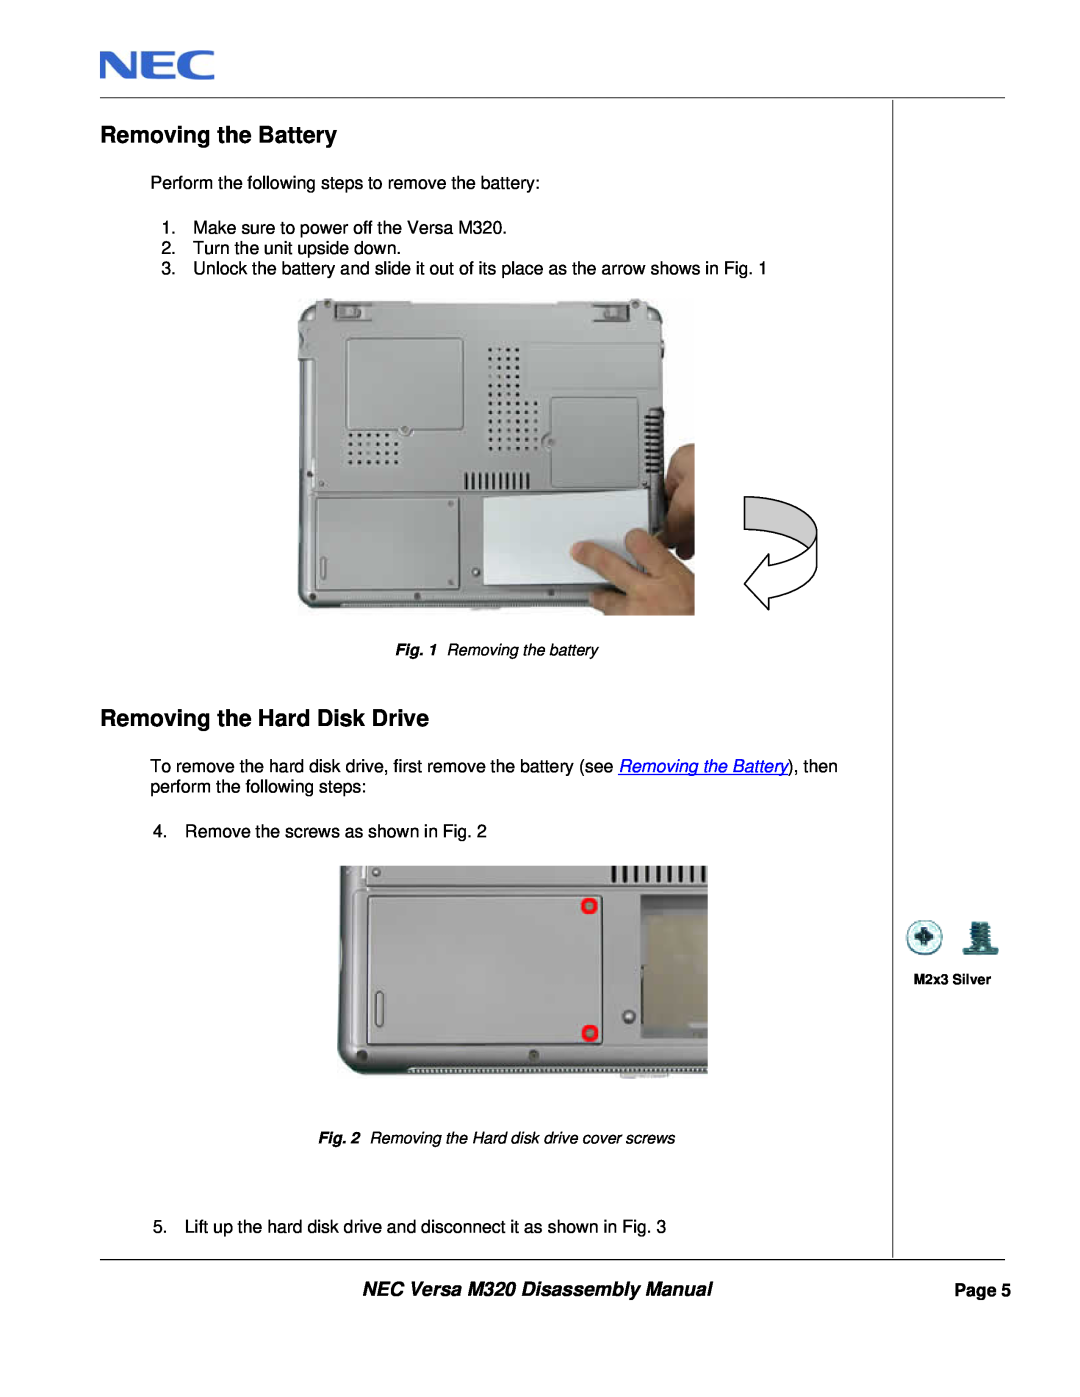 NEC manual Removing the Battery, Removing the Hard Disk Drive, NEC Versa M320 Disassembly Manual 